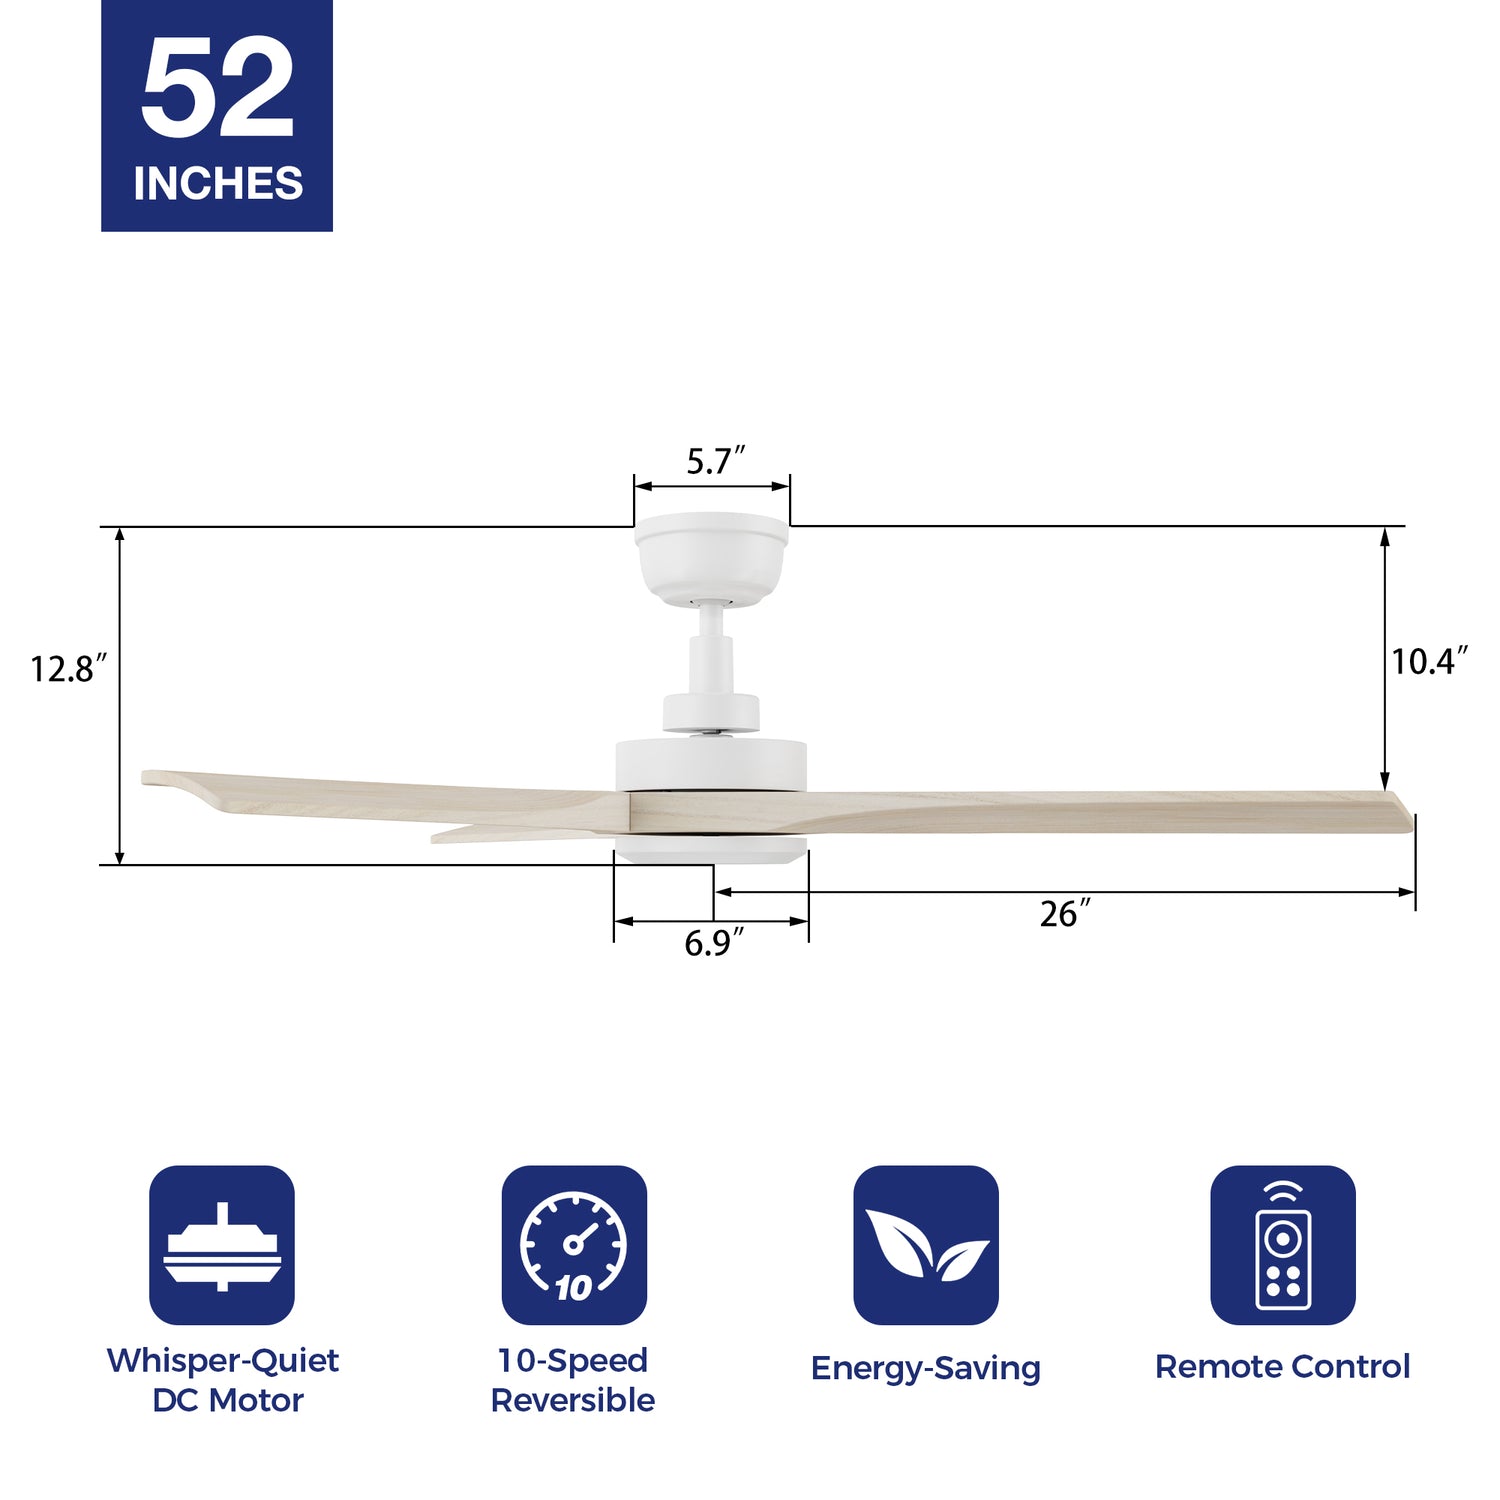 Enhance your indoor space with the 52in Ceiling Fan without lights. Reversible DC motor, Solid Wood blades, and modern design for personalized comfort. 